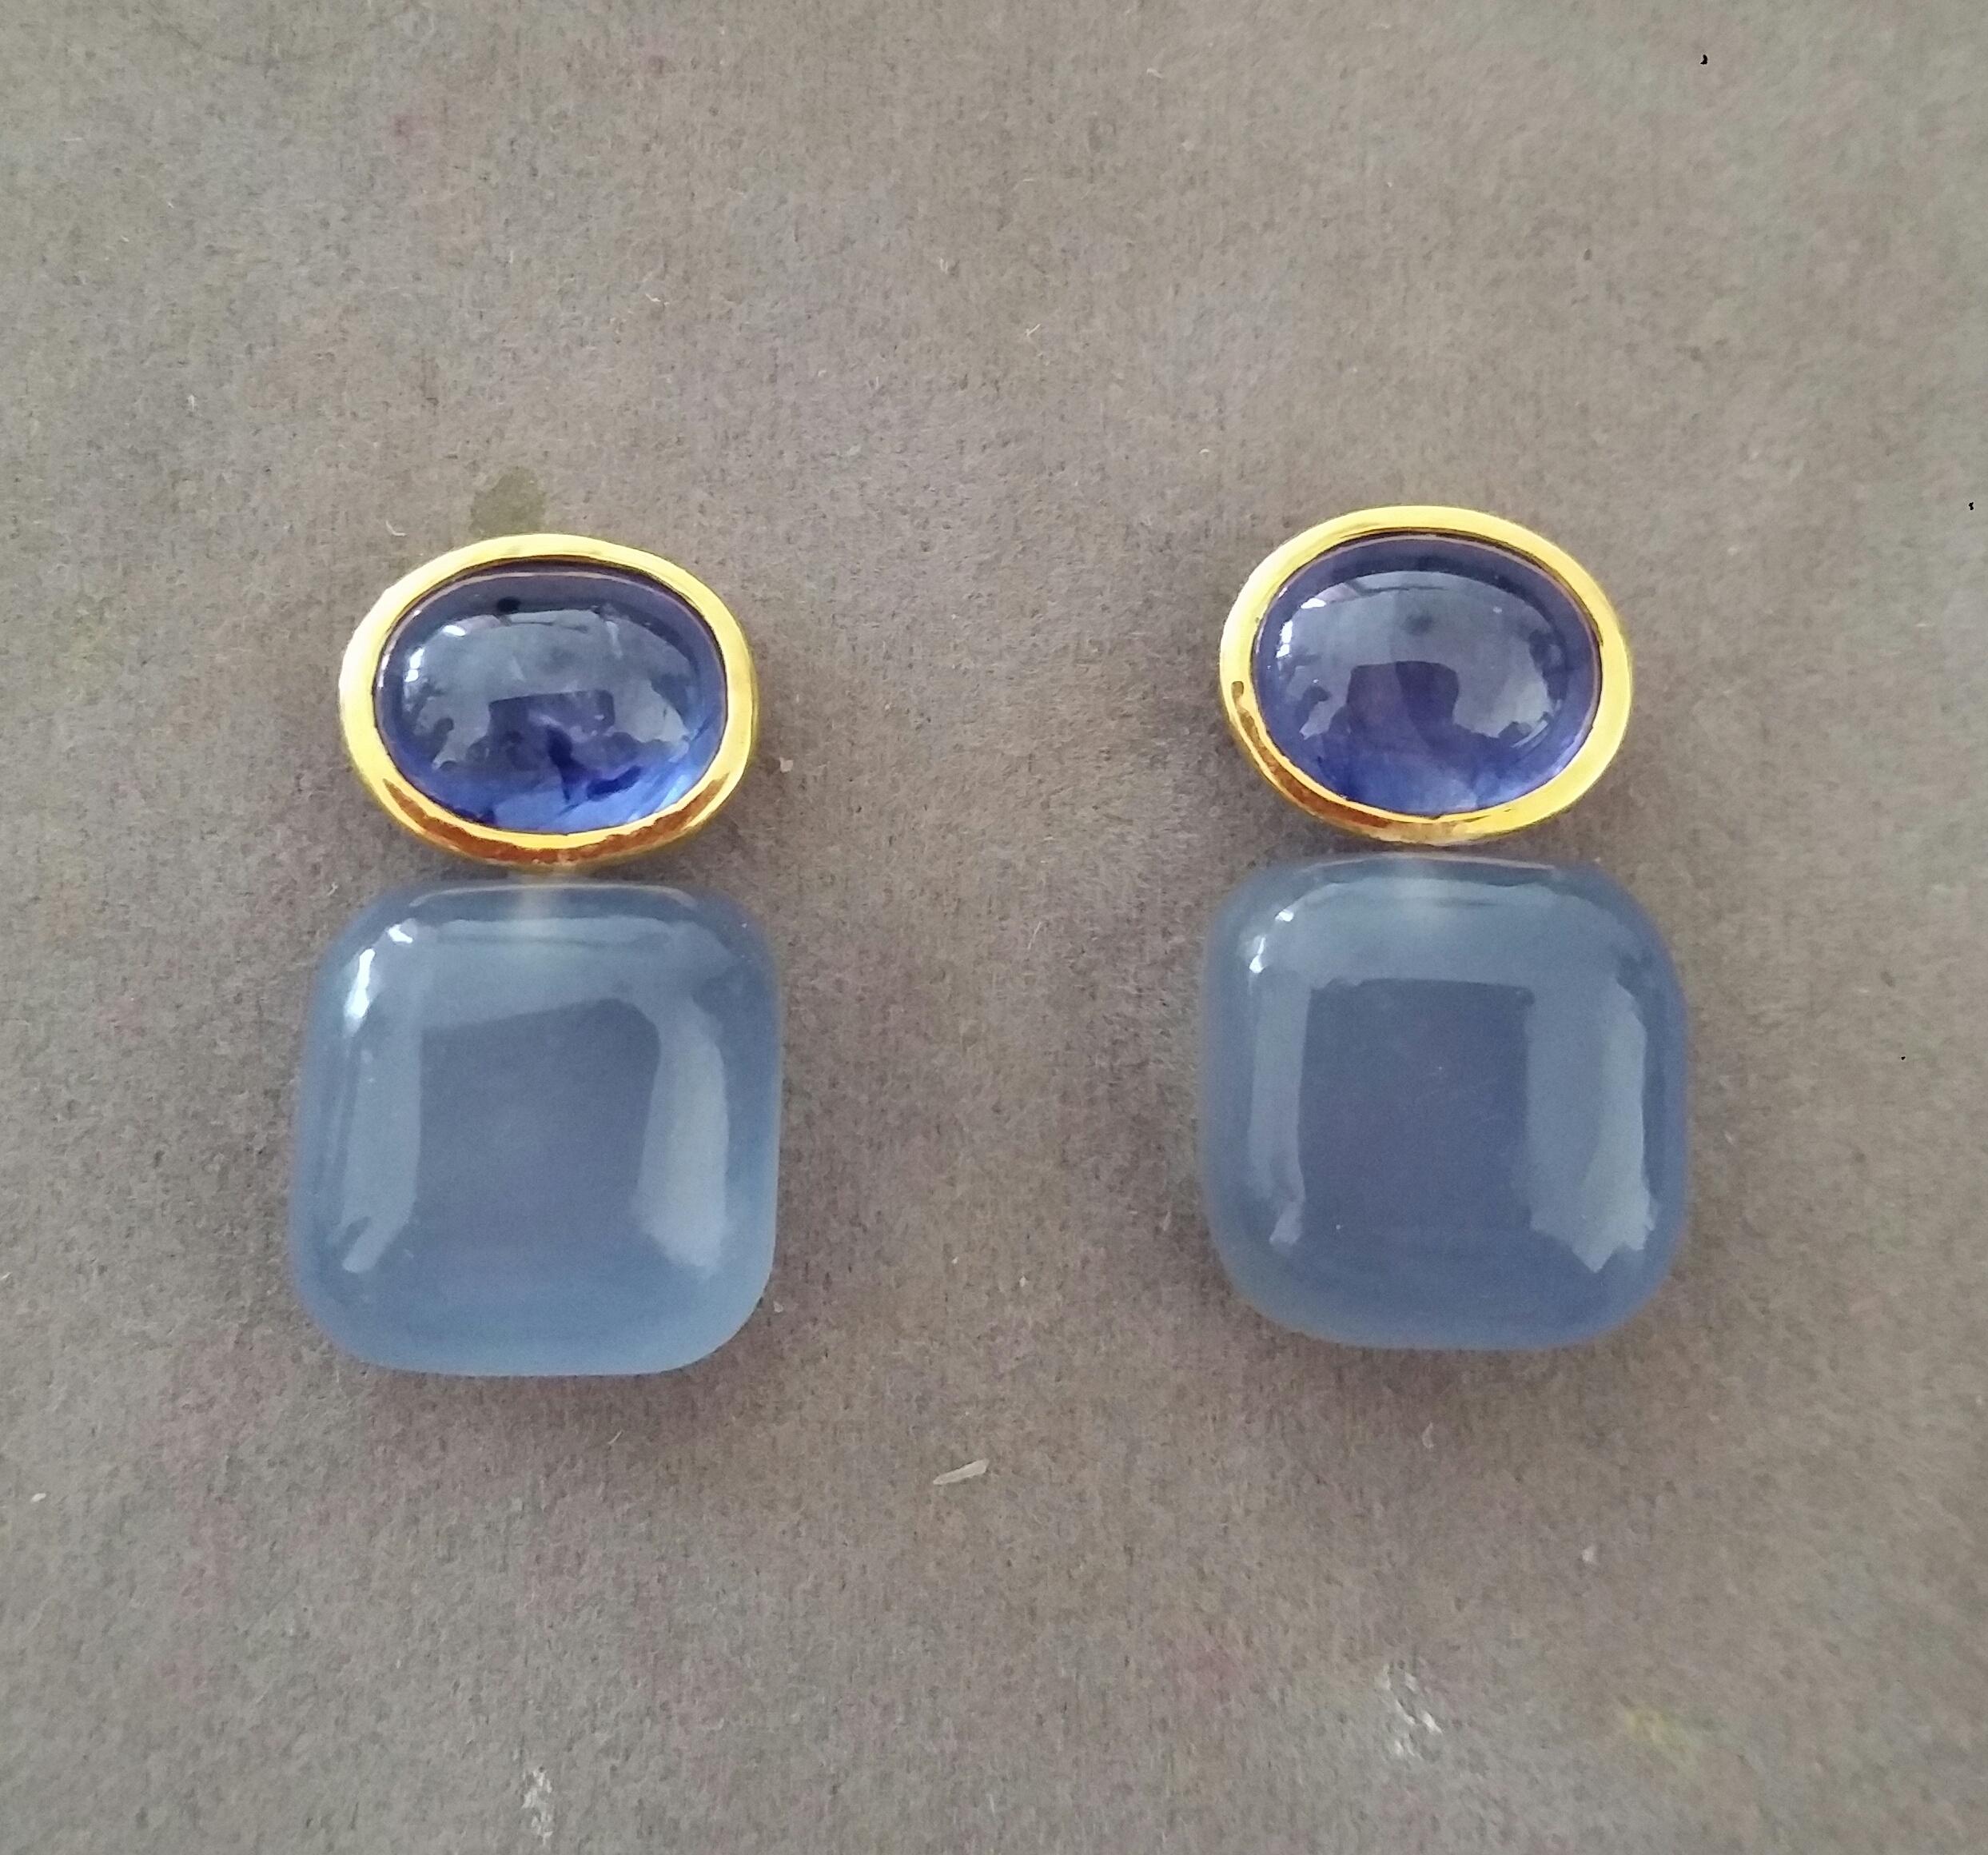 These simple but elegant and handmade earrings have 2 Oval  Blue Sapphire cabs measuring 8 x 10 mm set in a 14 Kt yellow gold bezel  at the top to which are suspended 2  Cushion Shape Blue Chalcedony  measuring 14 x 14 mm.

In 1978 our workshop